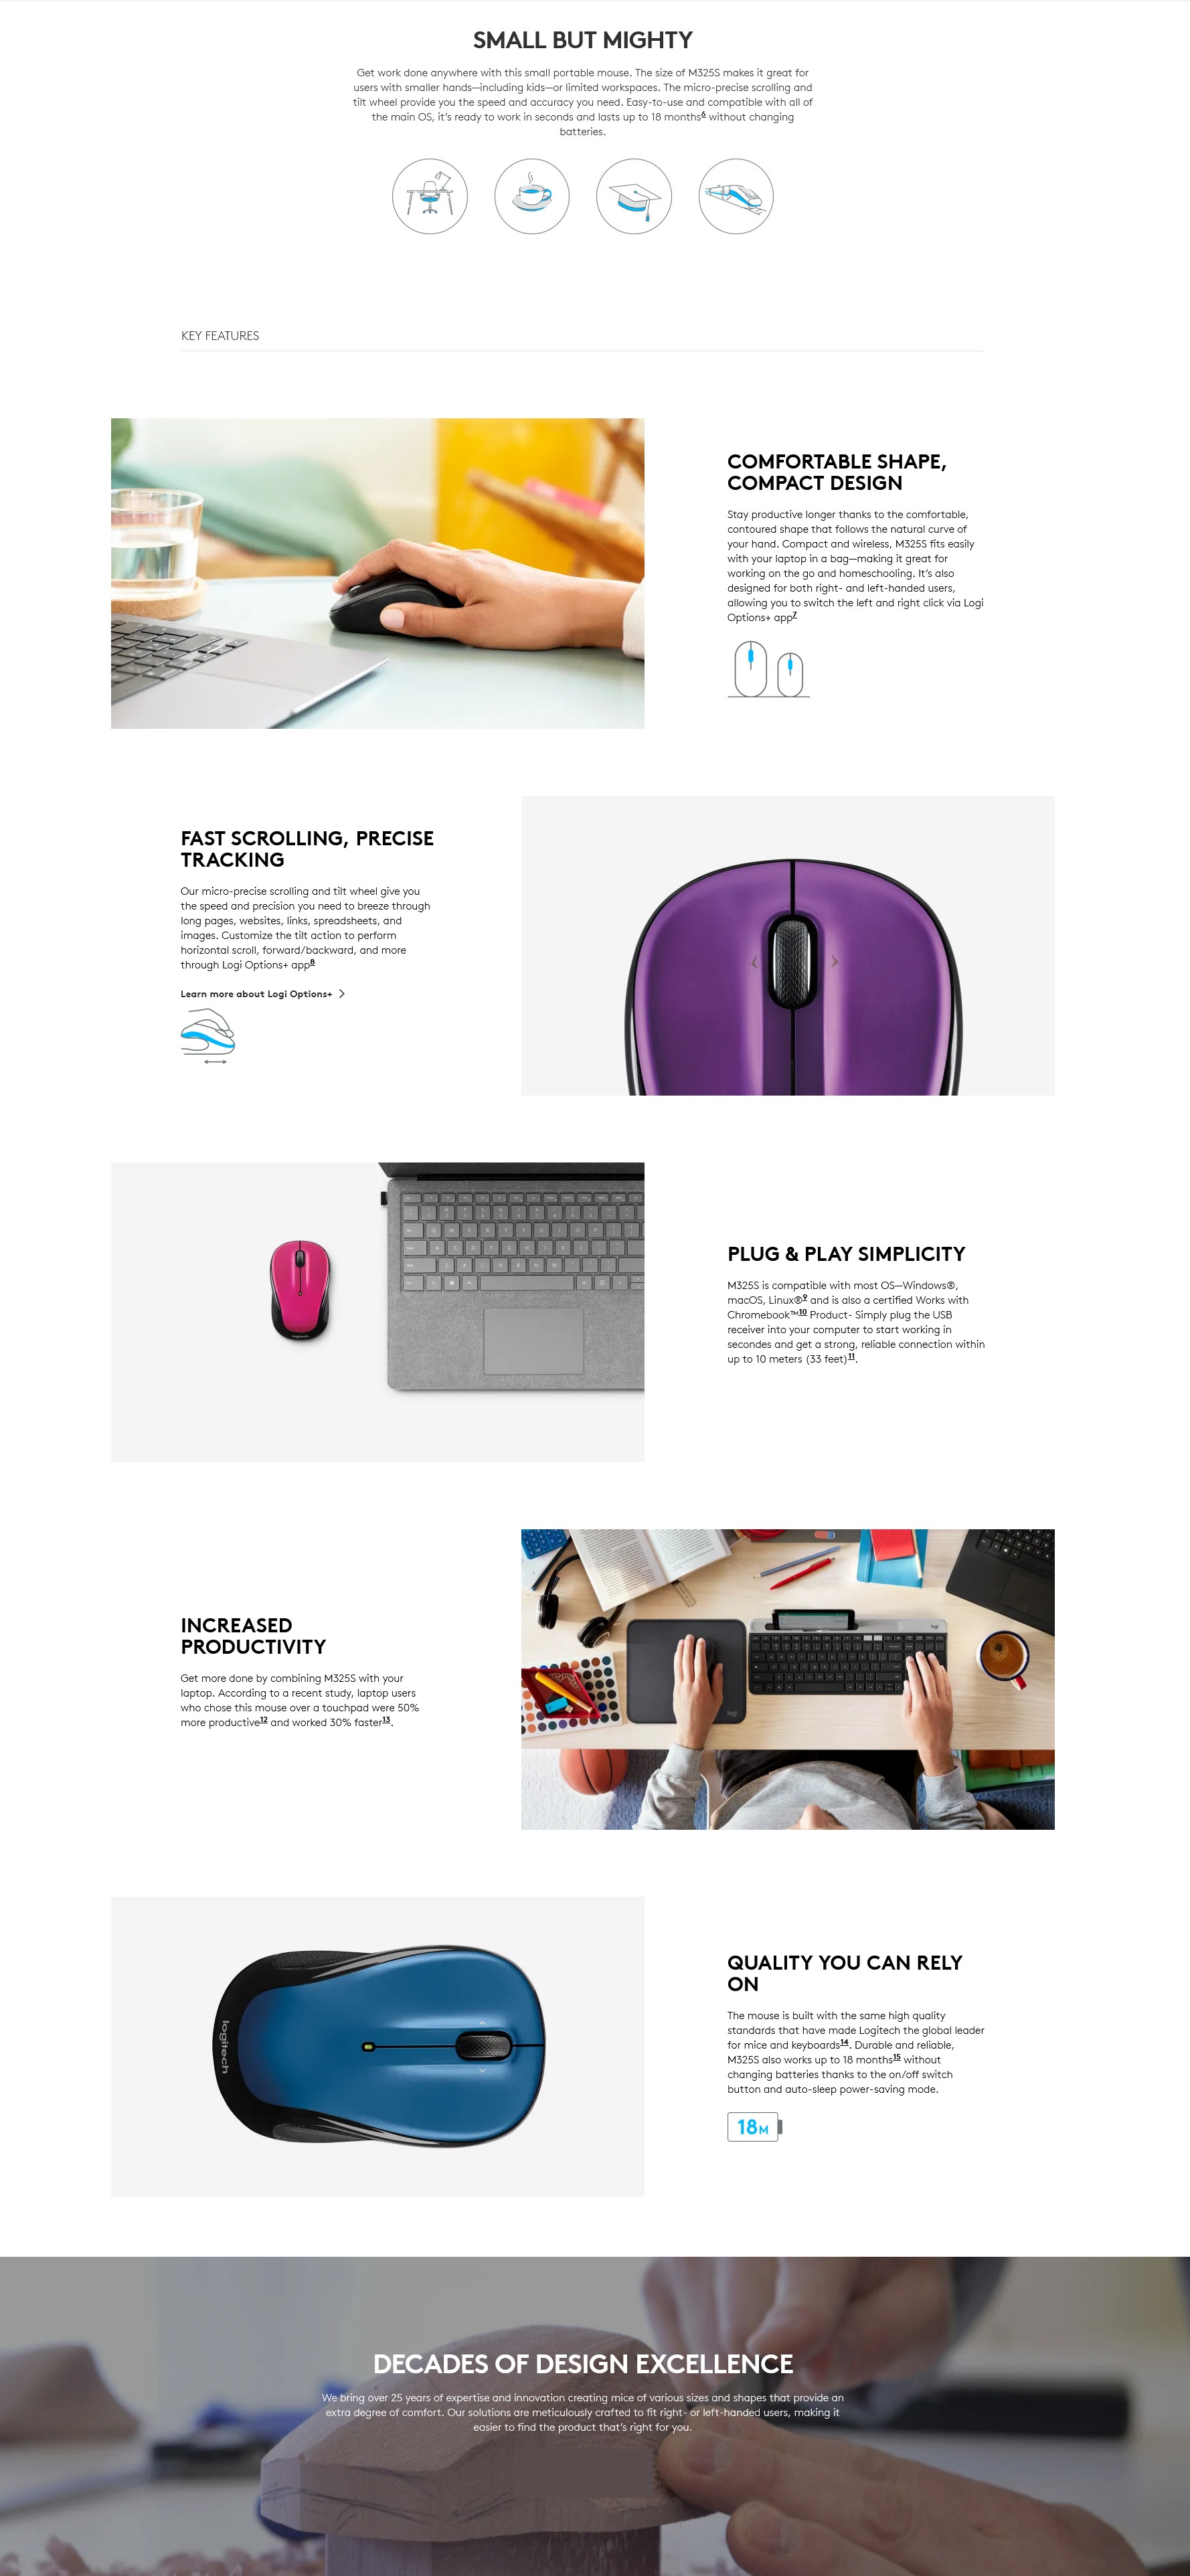 A large marketing image providing additional information about the product Logitech Wireless Mouse M325s - Light Silver - Additional alt info not provided